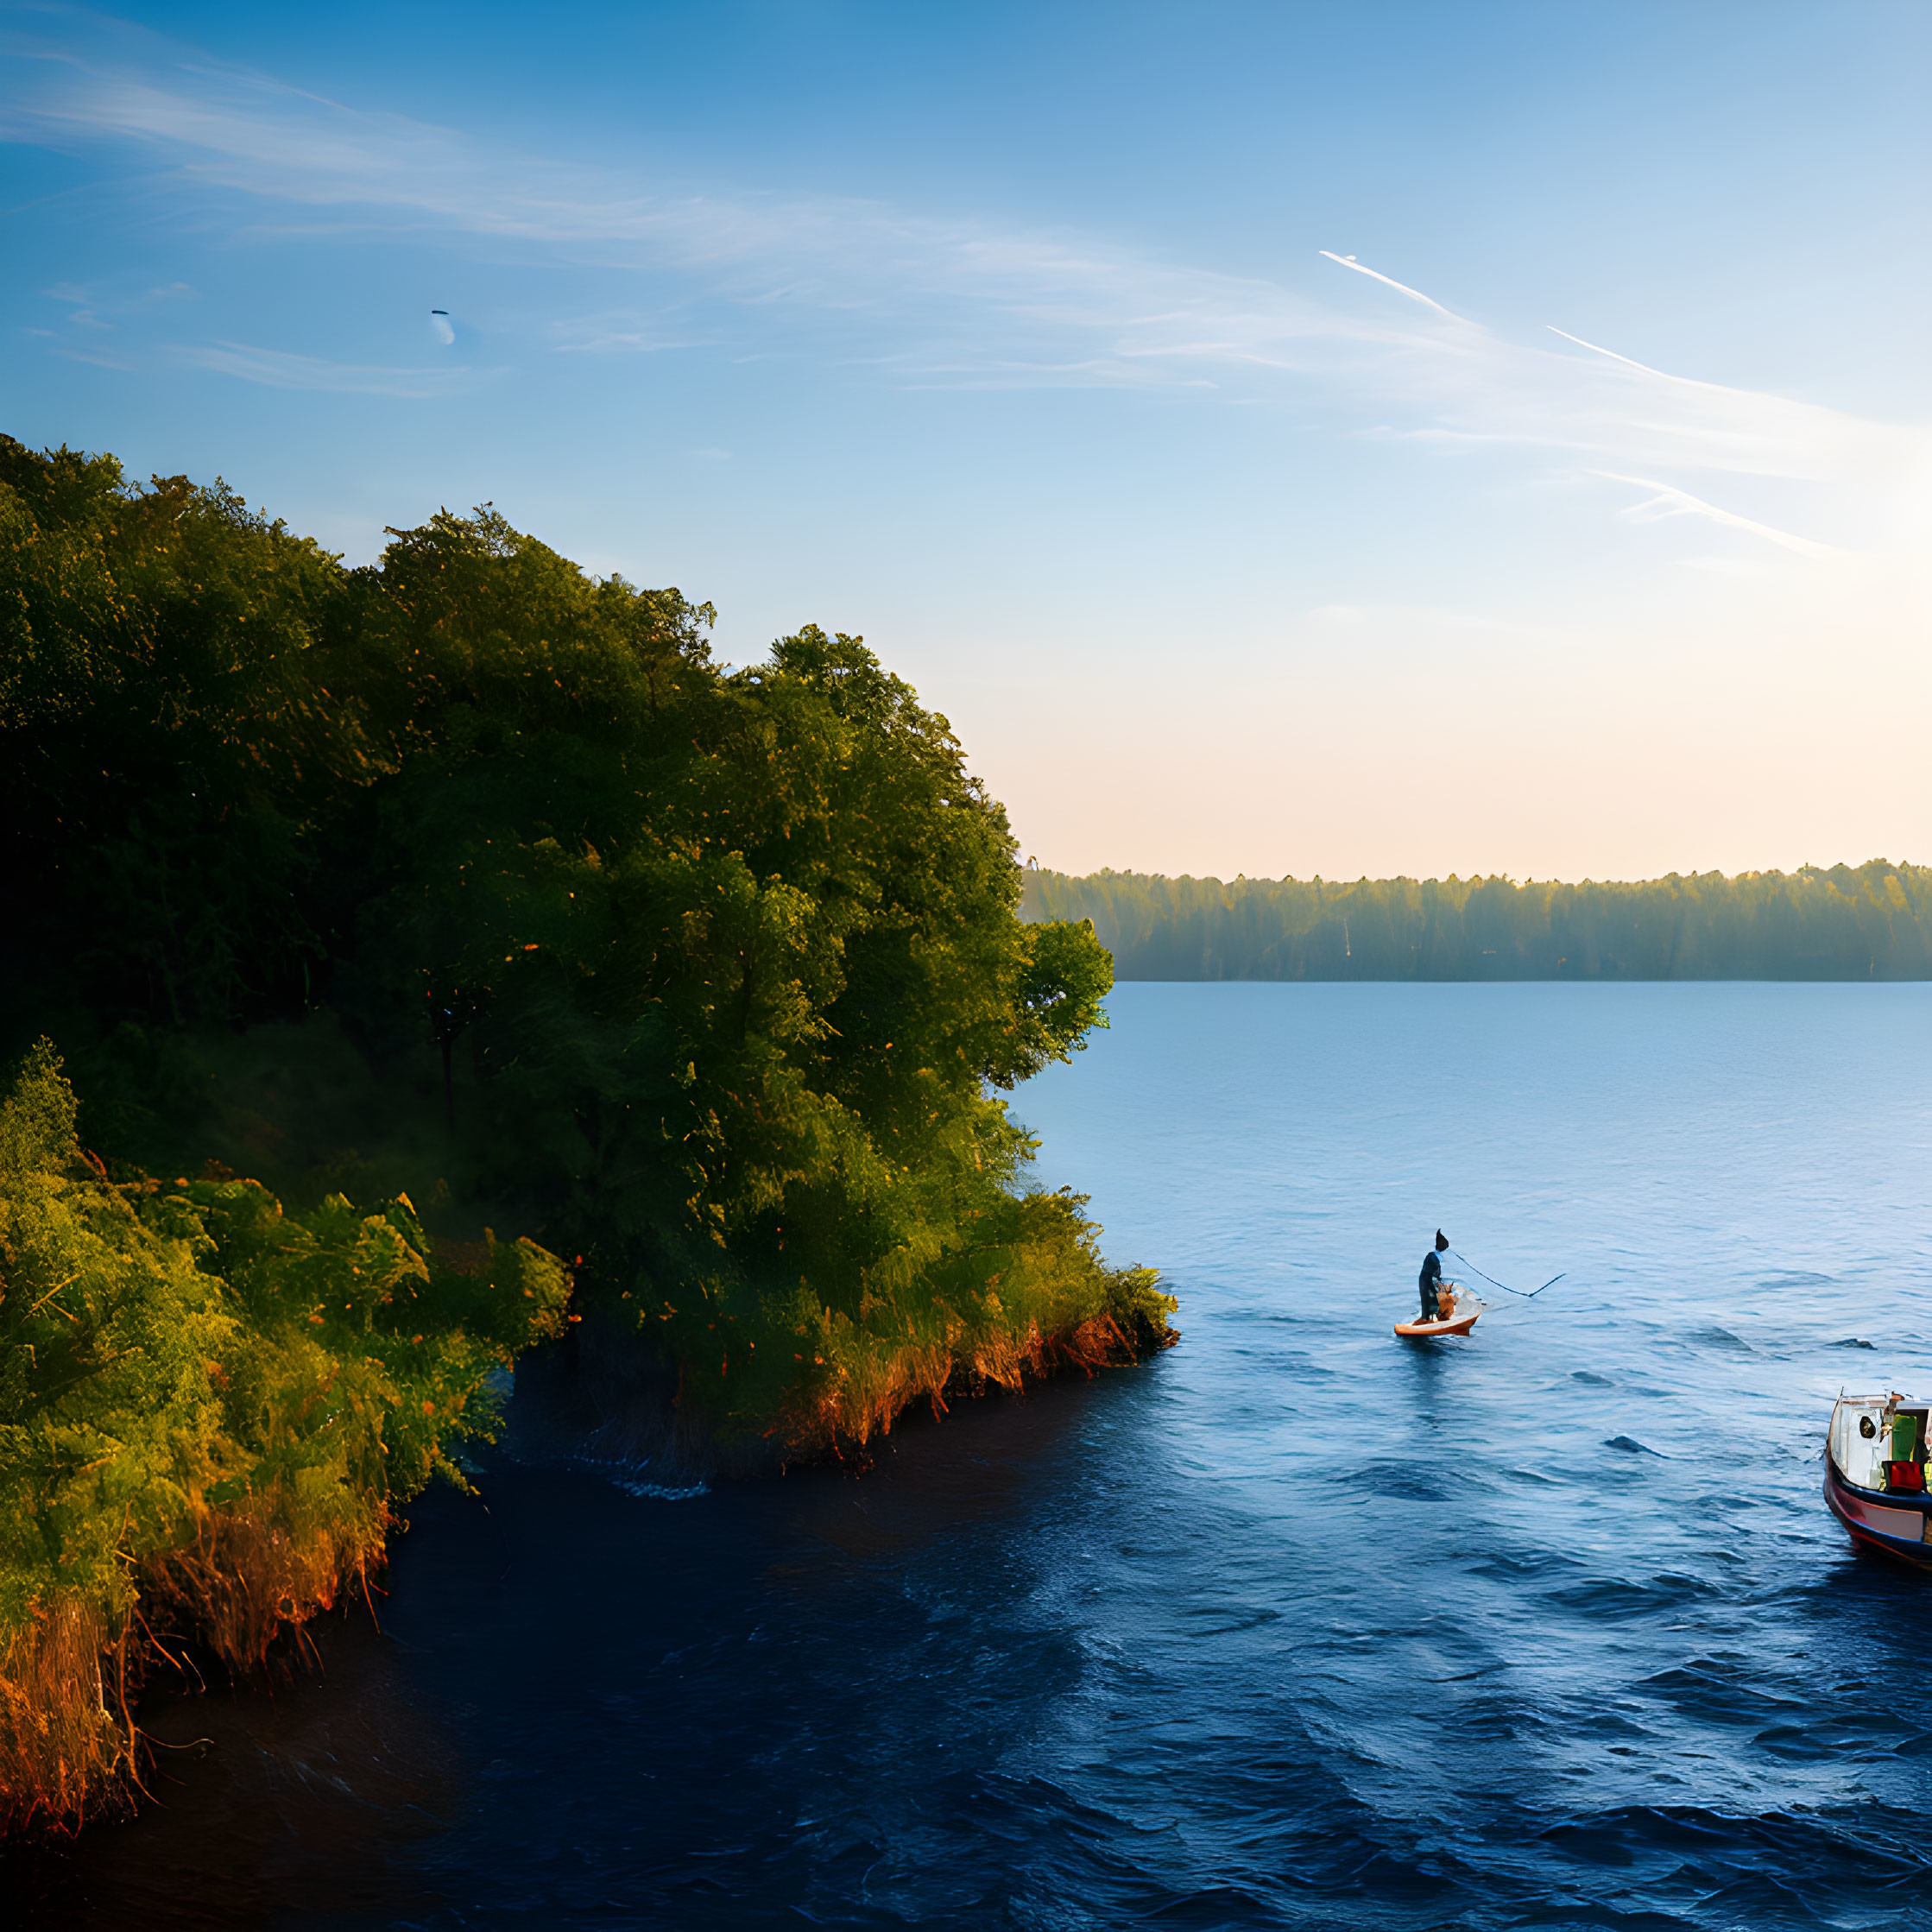 Tranquil sunrise lake scene with kayaker and boat, forested shoreline